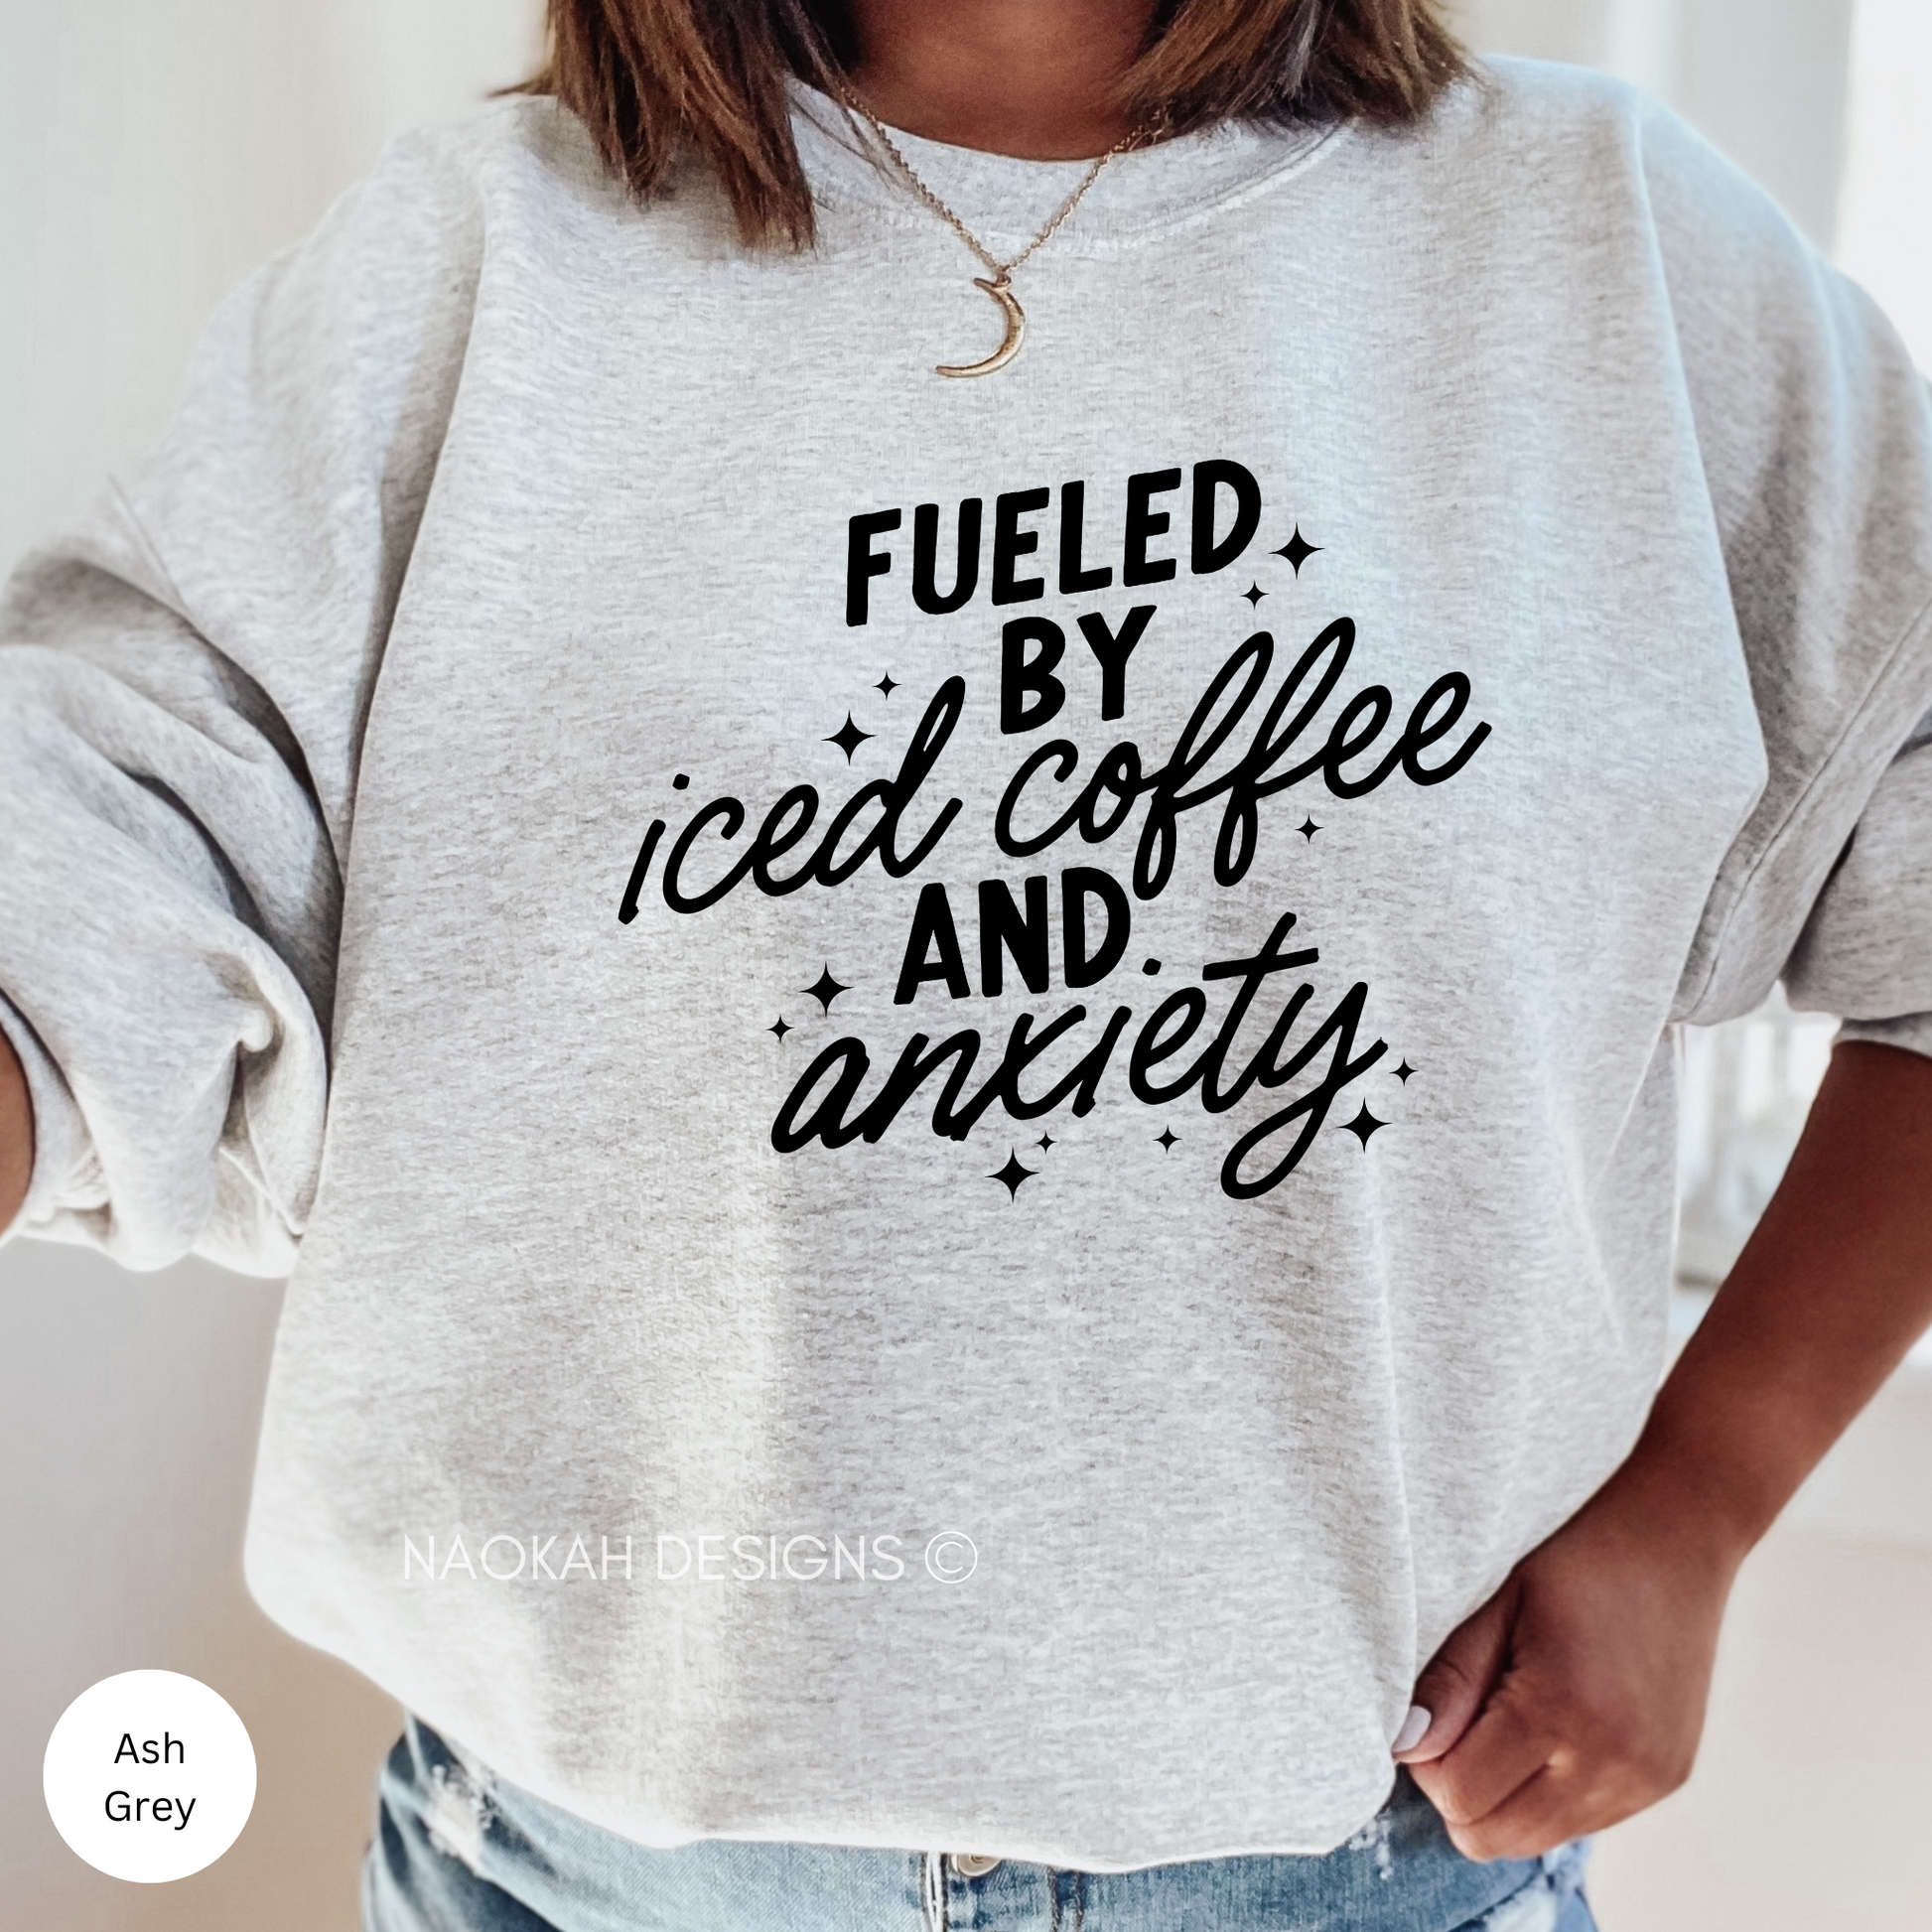 Fueled By Iced Coffee and Anxiety Sweater, Iced Coffee Addict Sweater, Mental Health Shirt, Anxiety Shirt, Overstimulated Moms Club Shirt